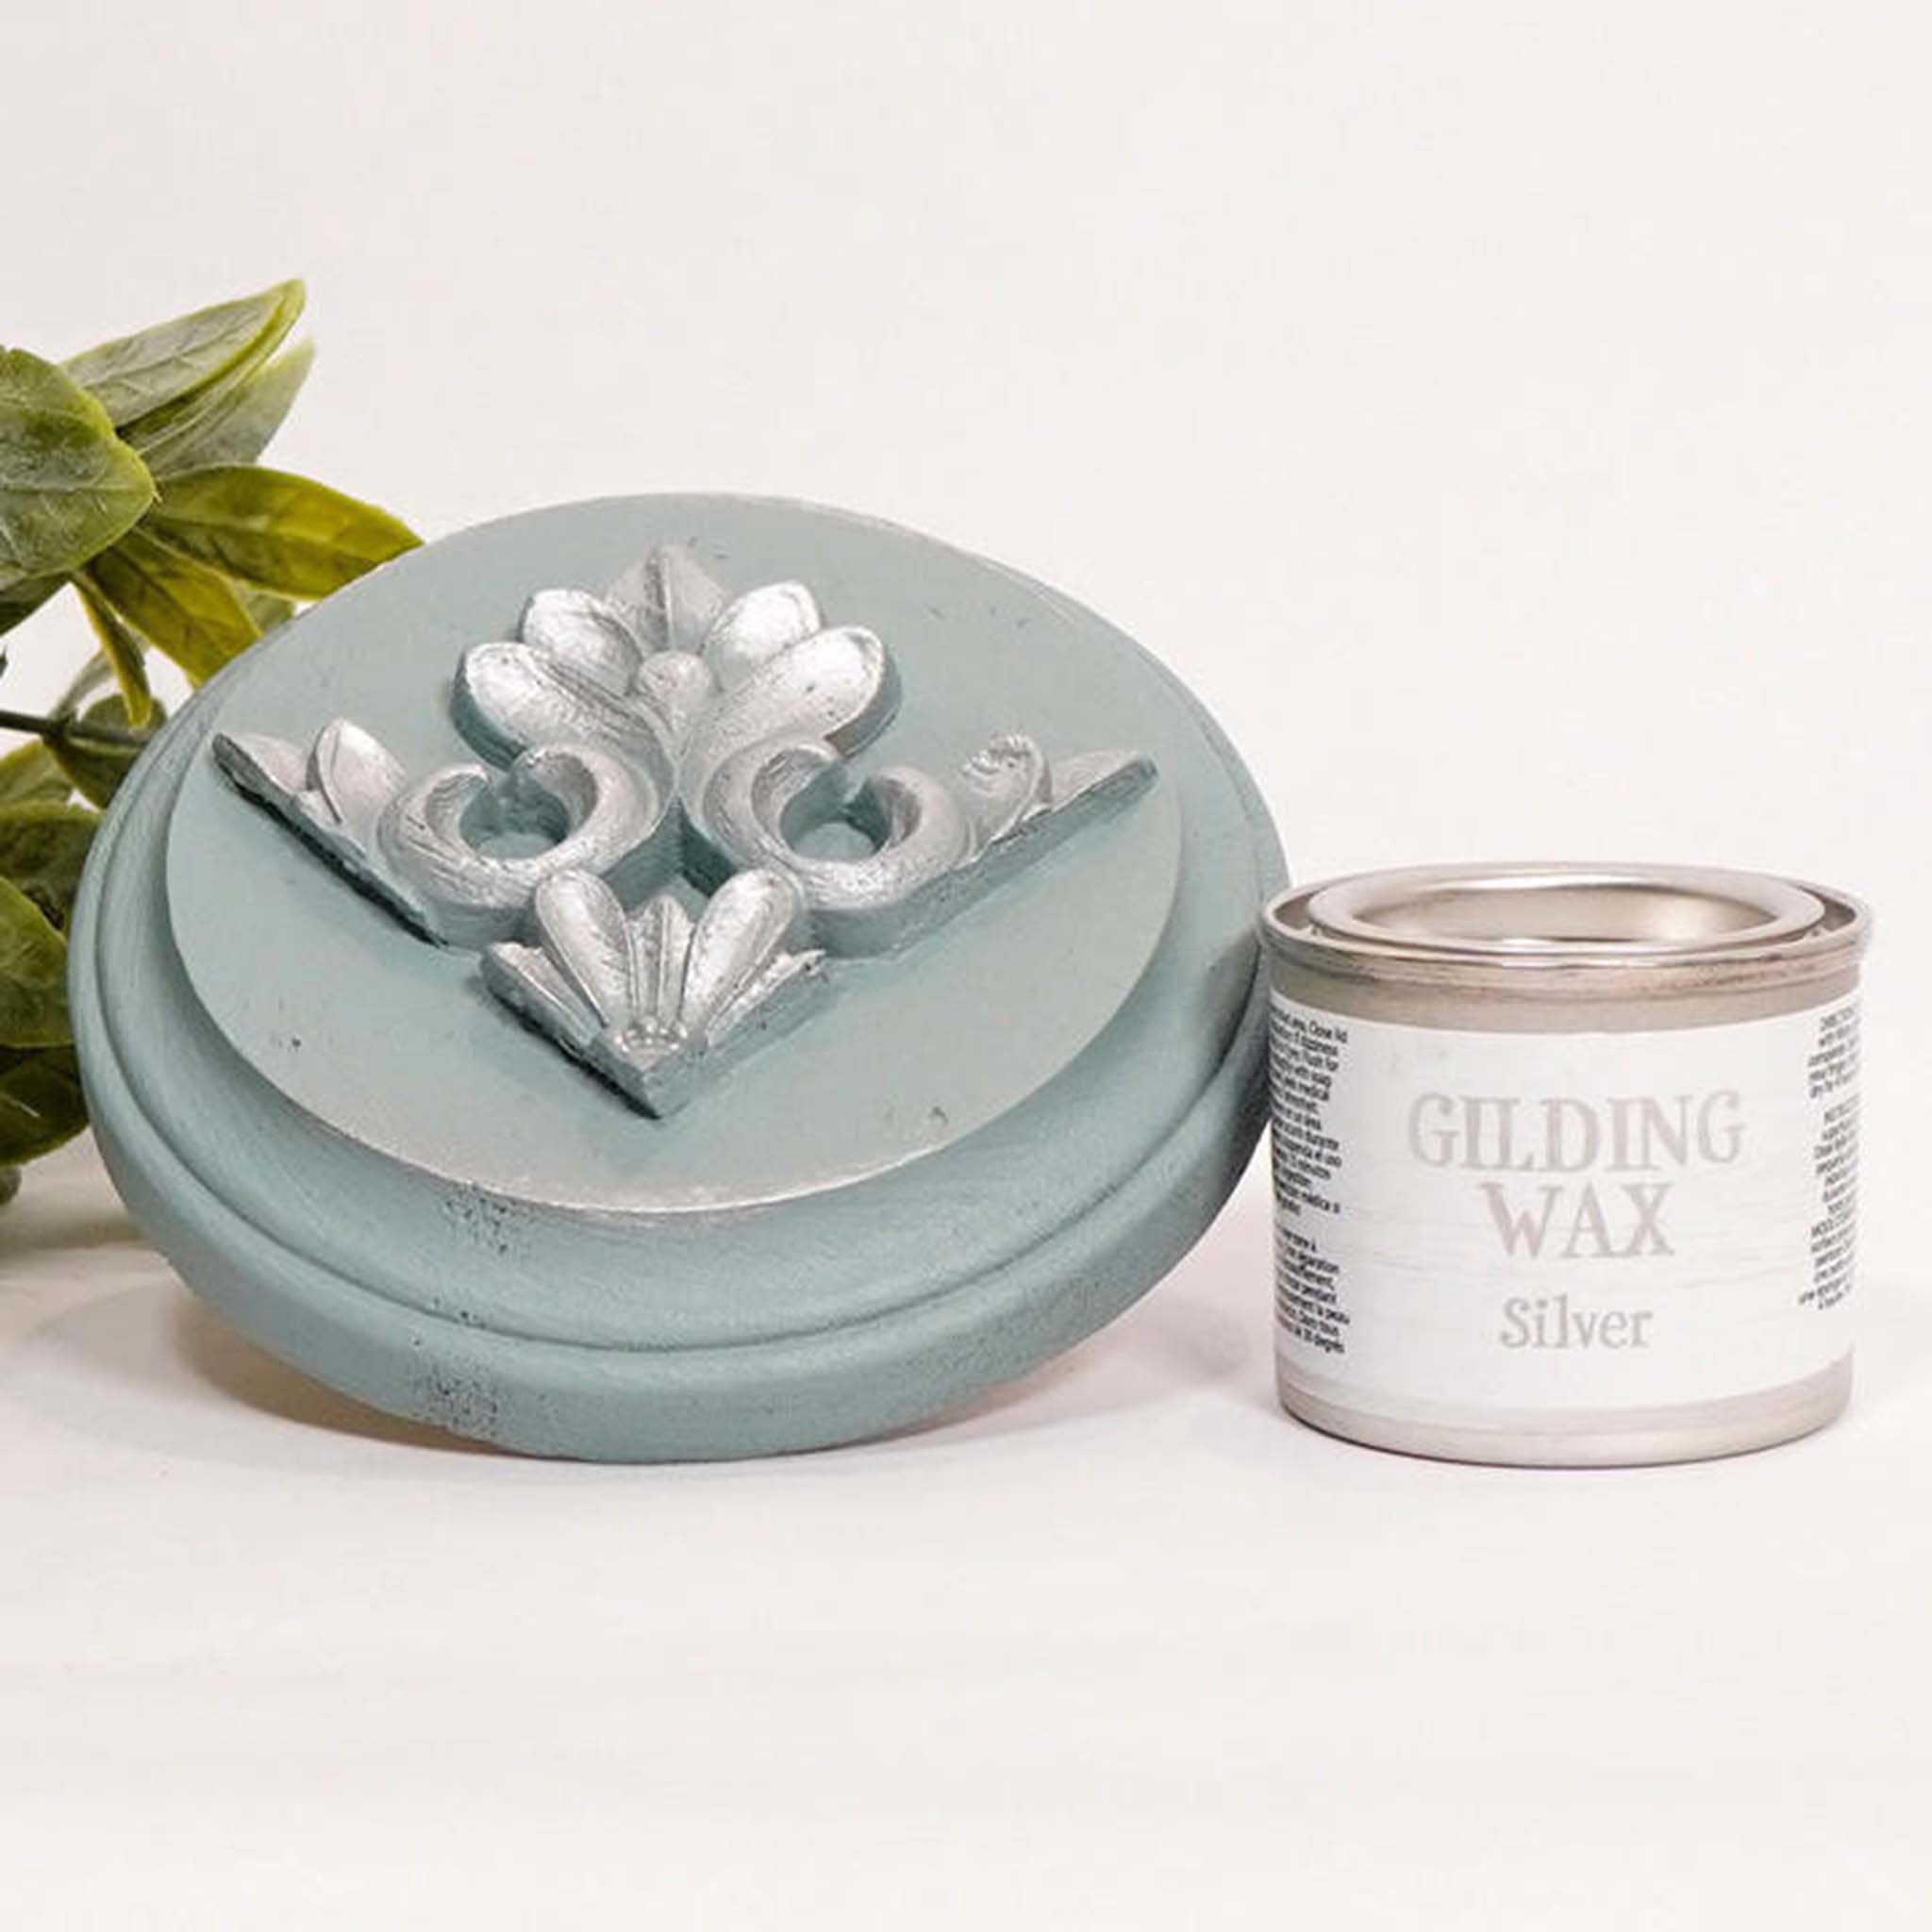 A can of Dixie Belle's Silver Gilding wax is next to a light blue painted round wood sample. The wood sample has an ornate silicone mold casting that features the silver gilding wax on it.